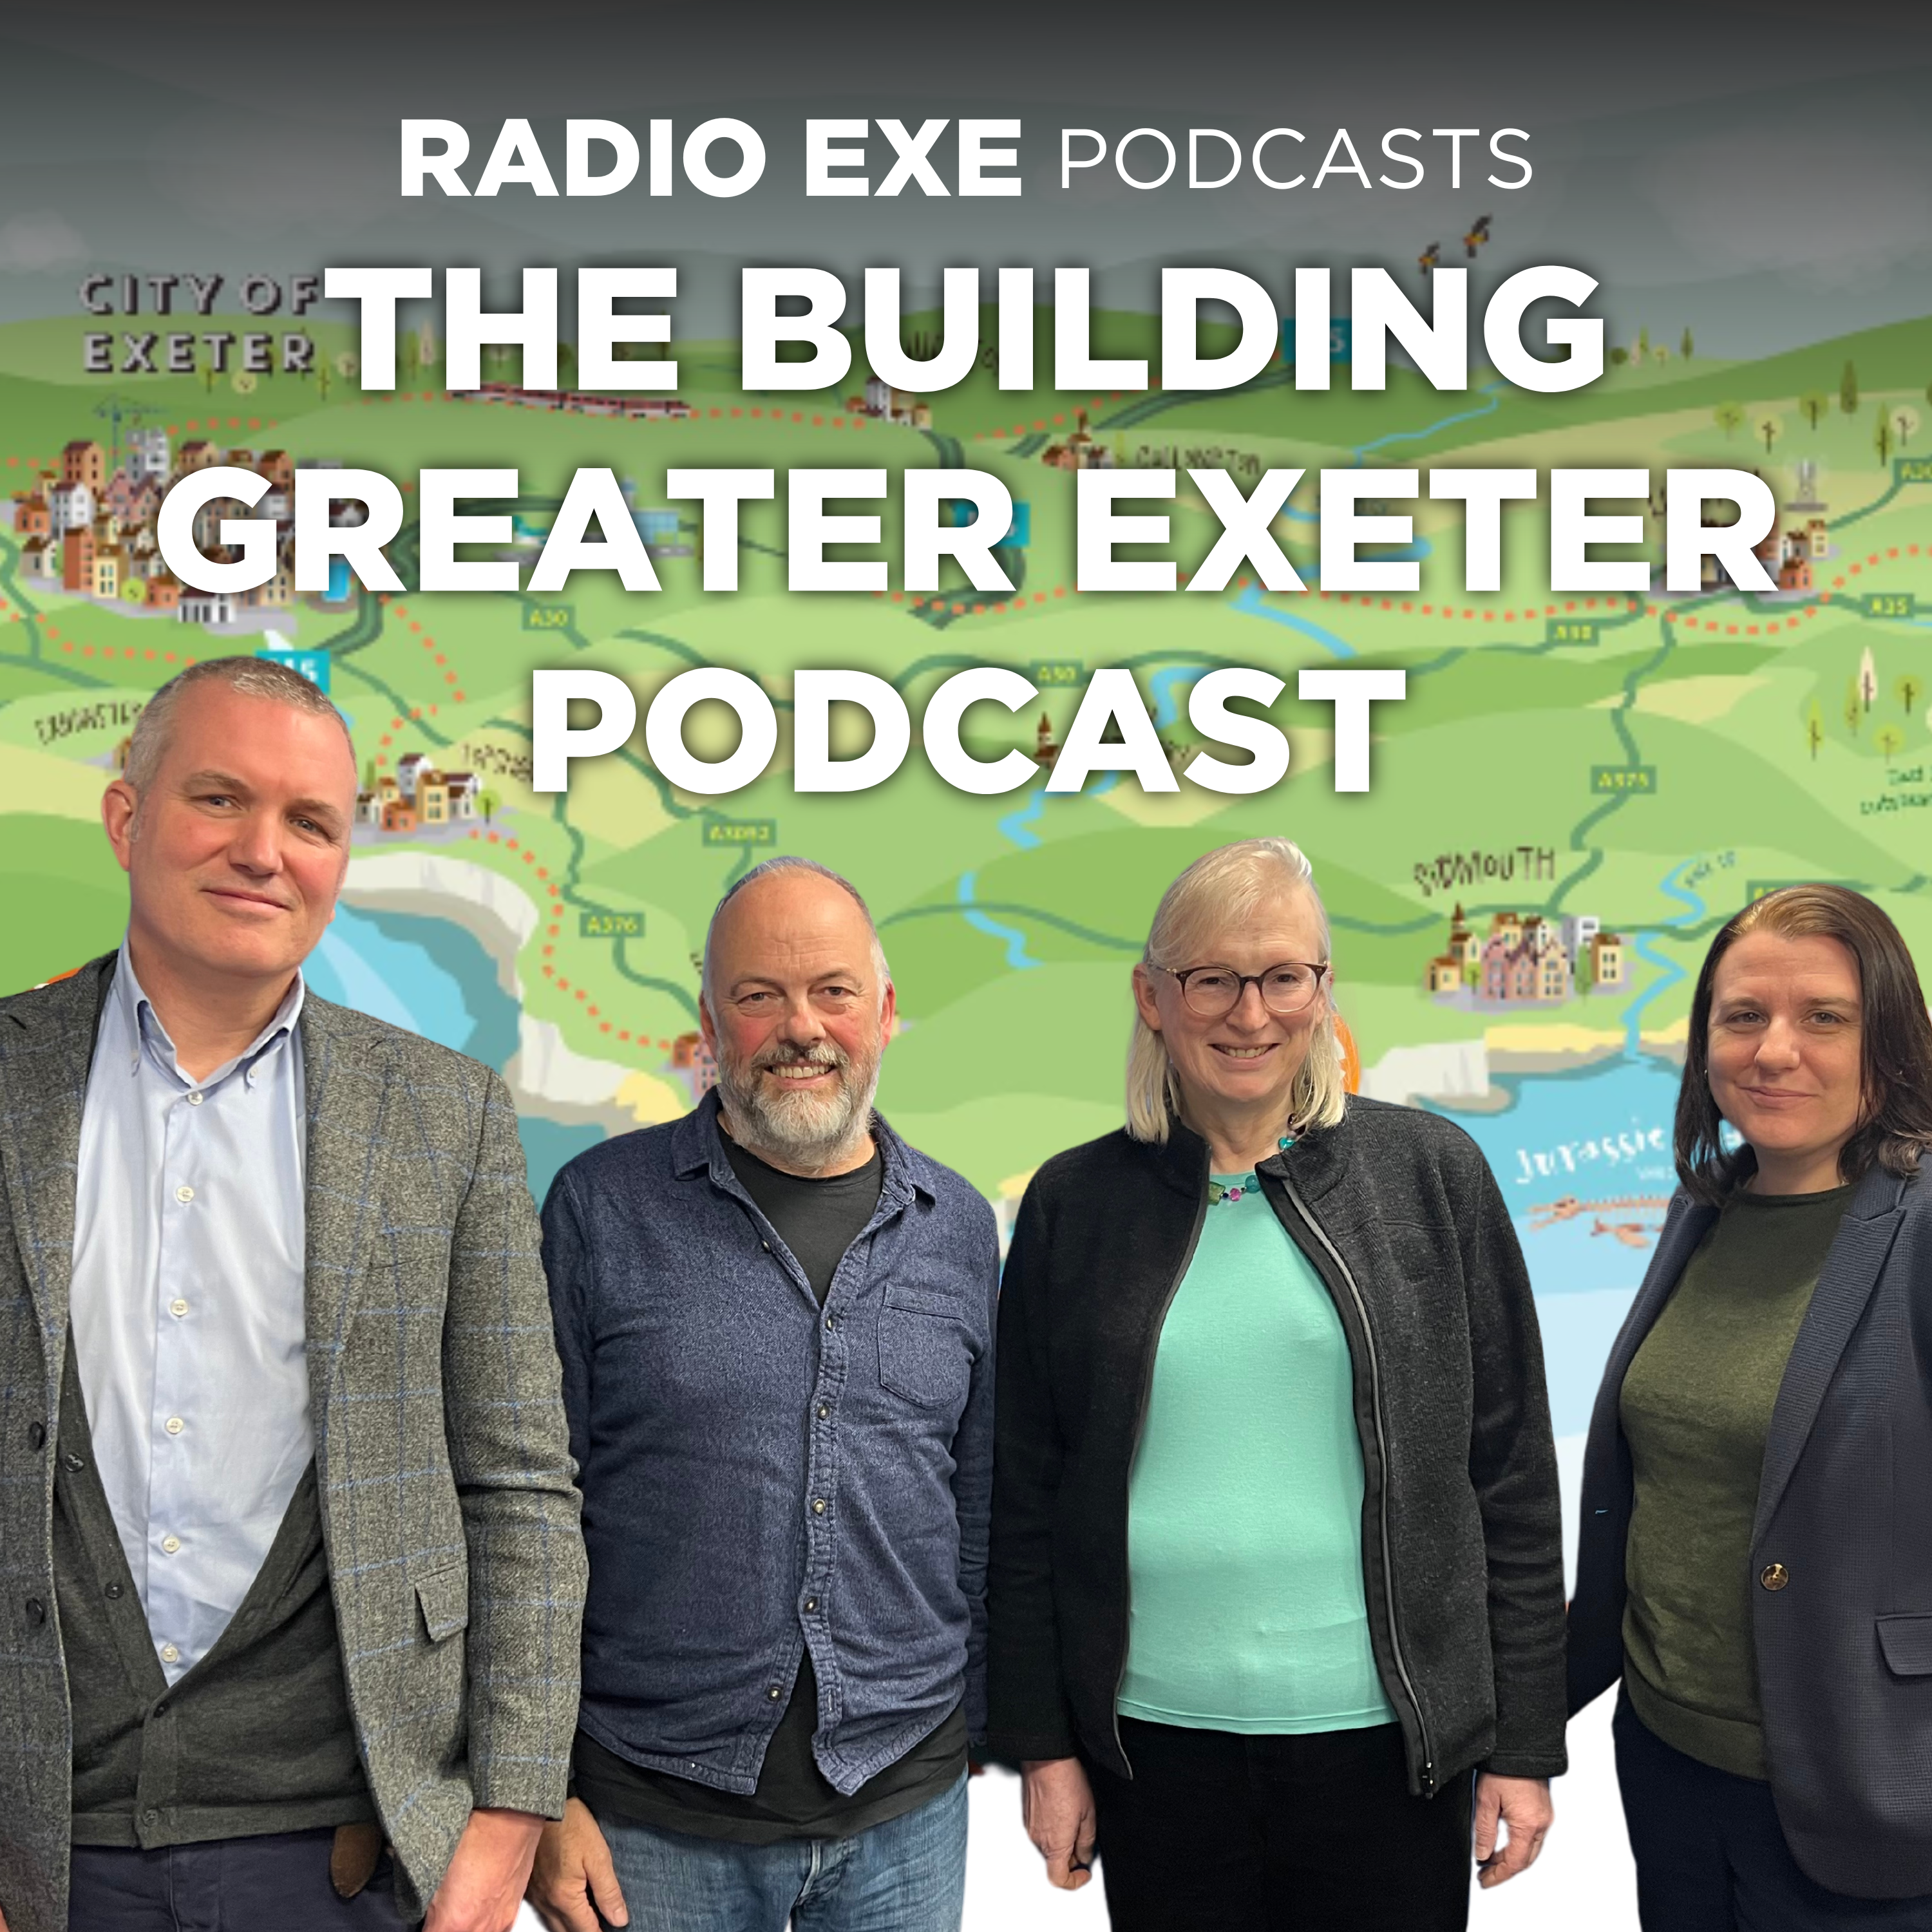 The Building Greater Exeter podcast